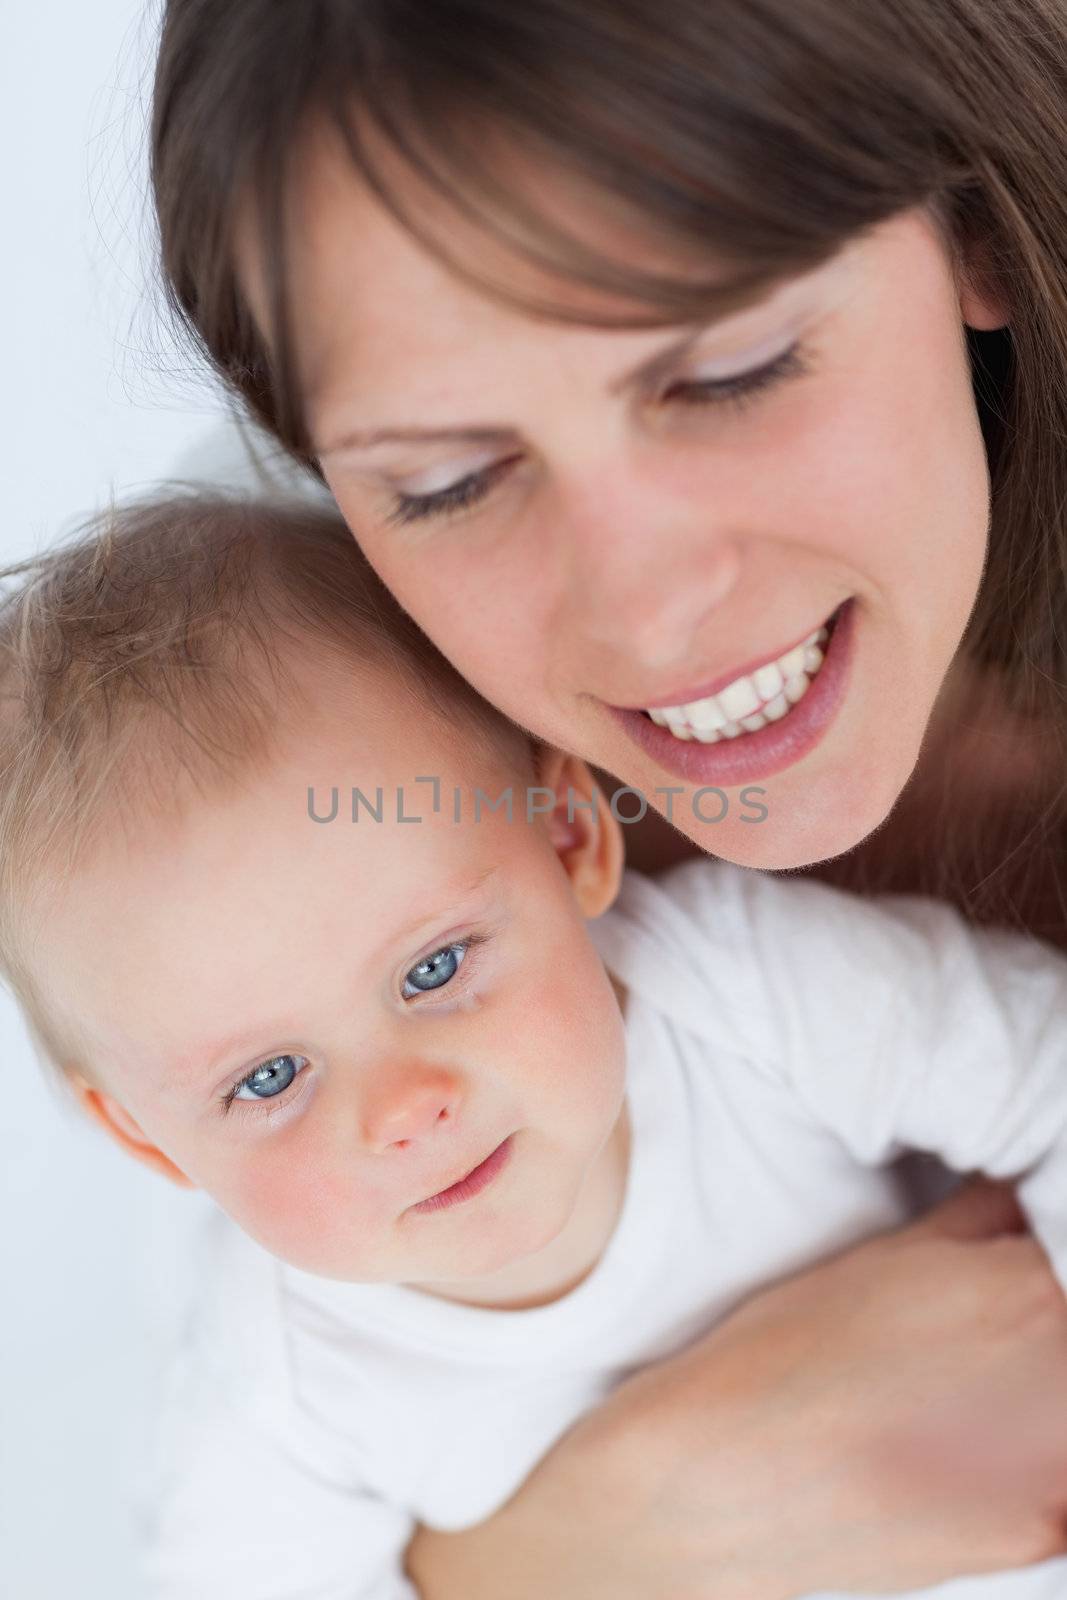 Cheerful mother holding her cute baby against a grey background